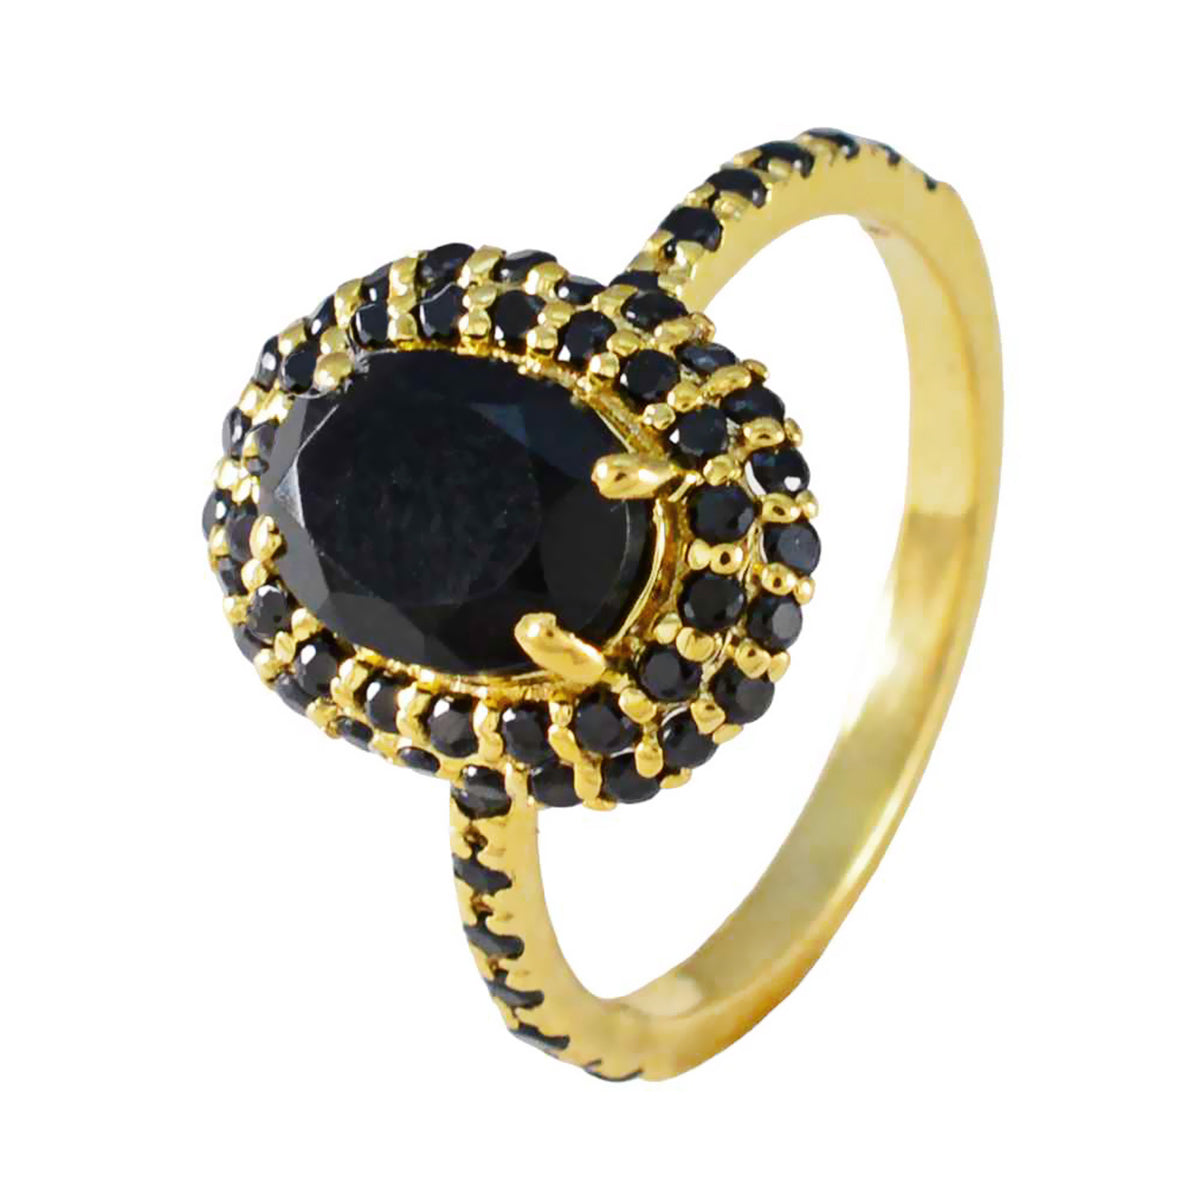 Riyo Gemstone Silver Ring With Yellow Gold Plating Black Onyx Stone Oval Shape Prong Setting Jewelry Cocktail Ring